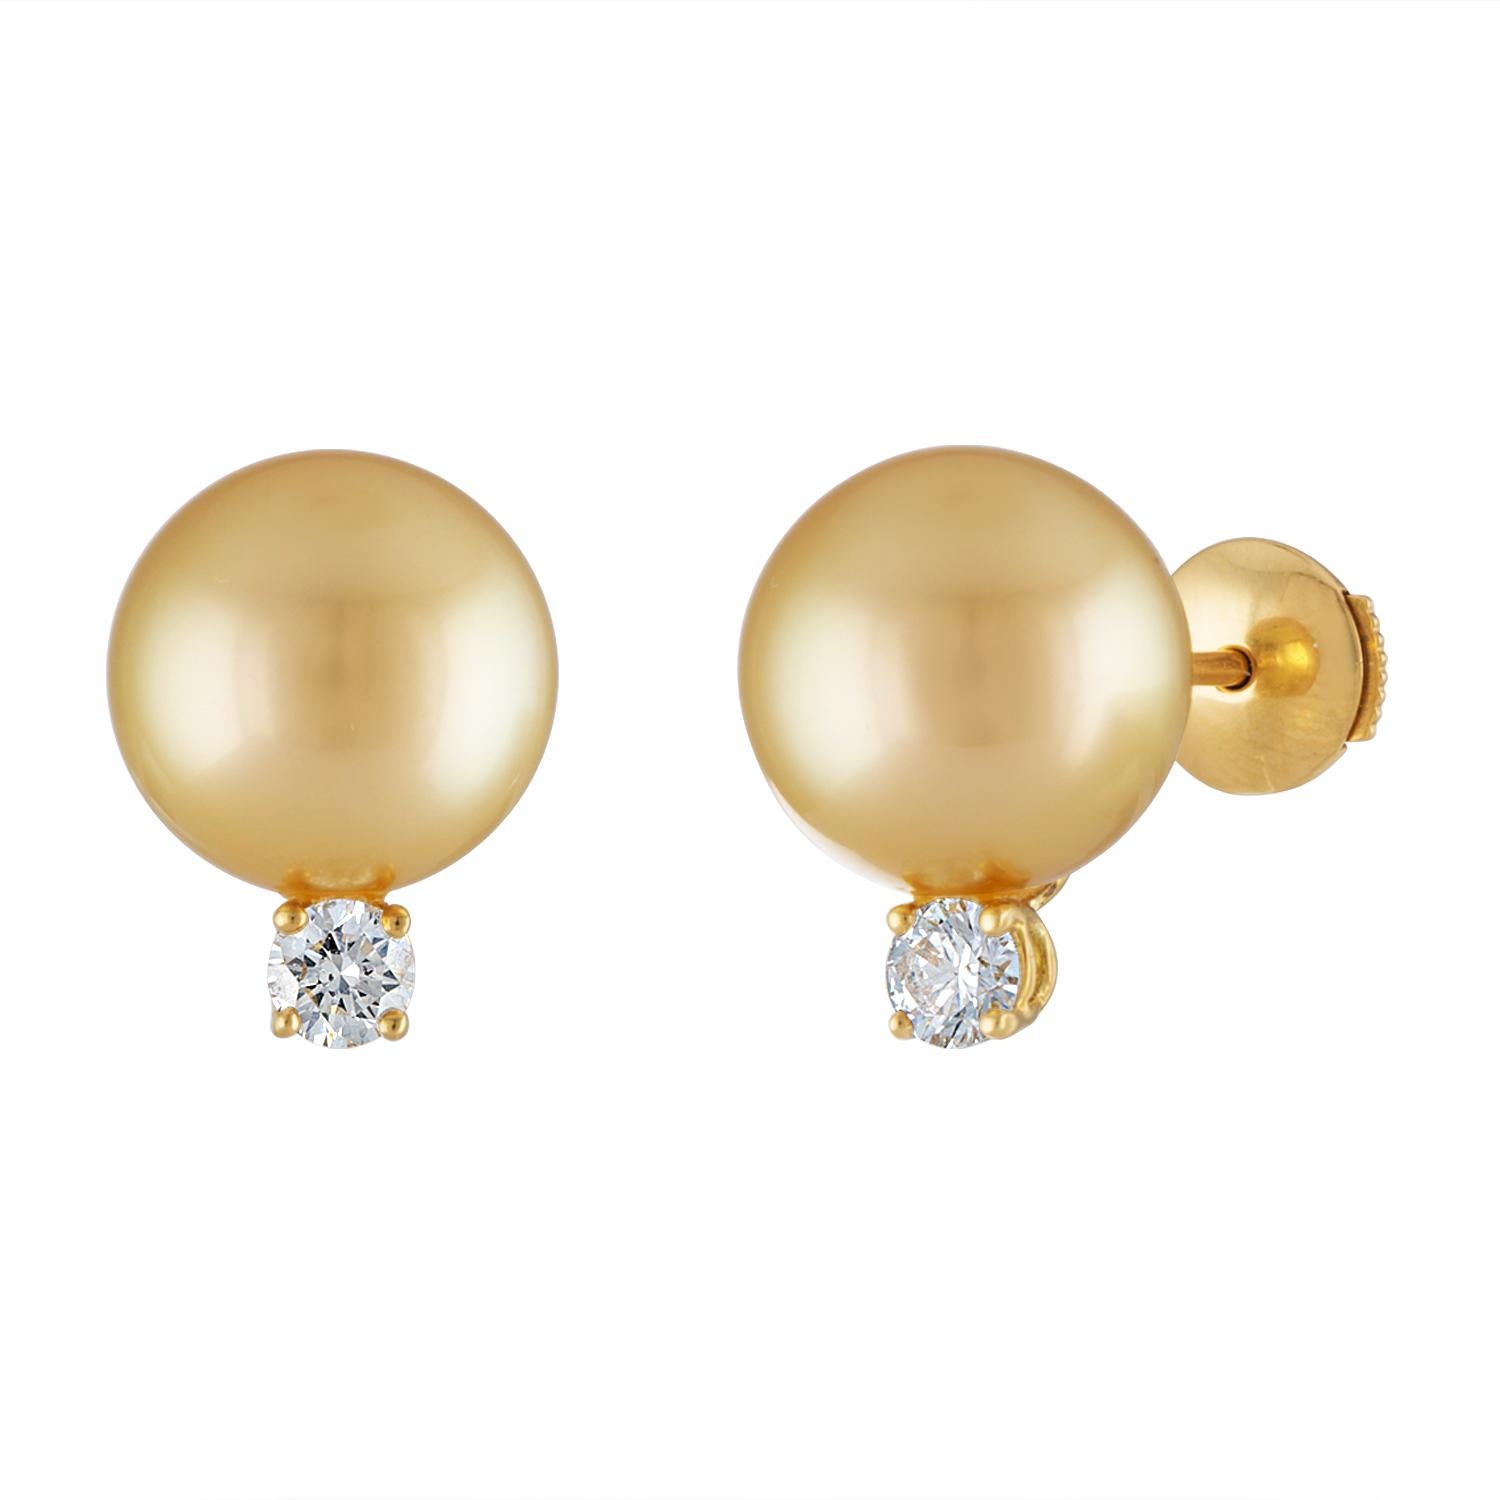 These elegant South Sea Pearl and diamond stud earrings consist of 11.7mm natural color Golden pearls set on 18K yellow gold accented by 0.47 carats of sparkling diamonds.
These South Sea pearls feature very clean surface and high luster.
This is a